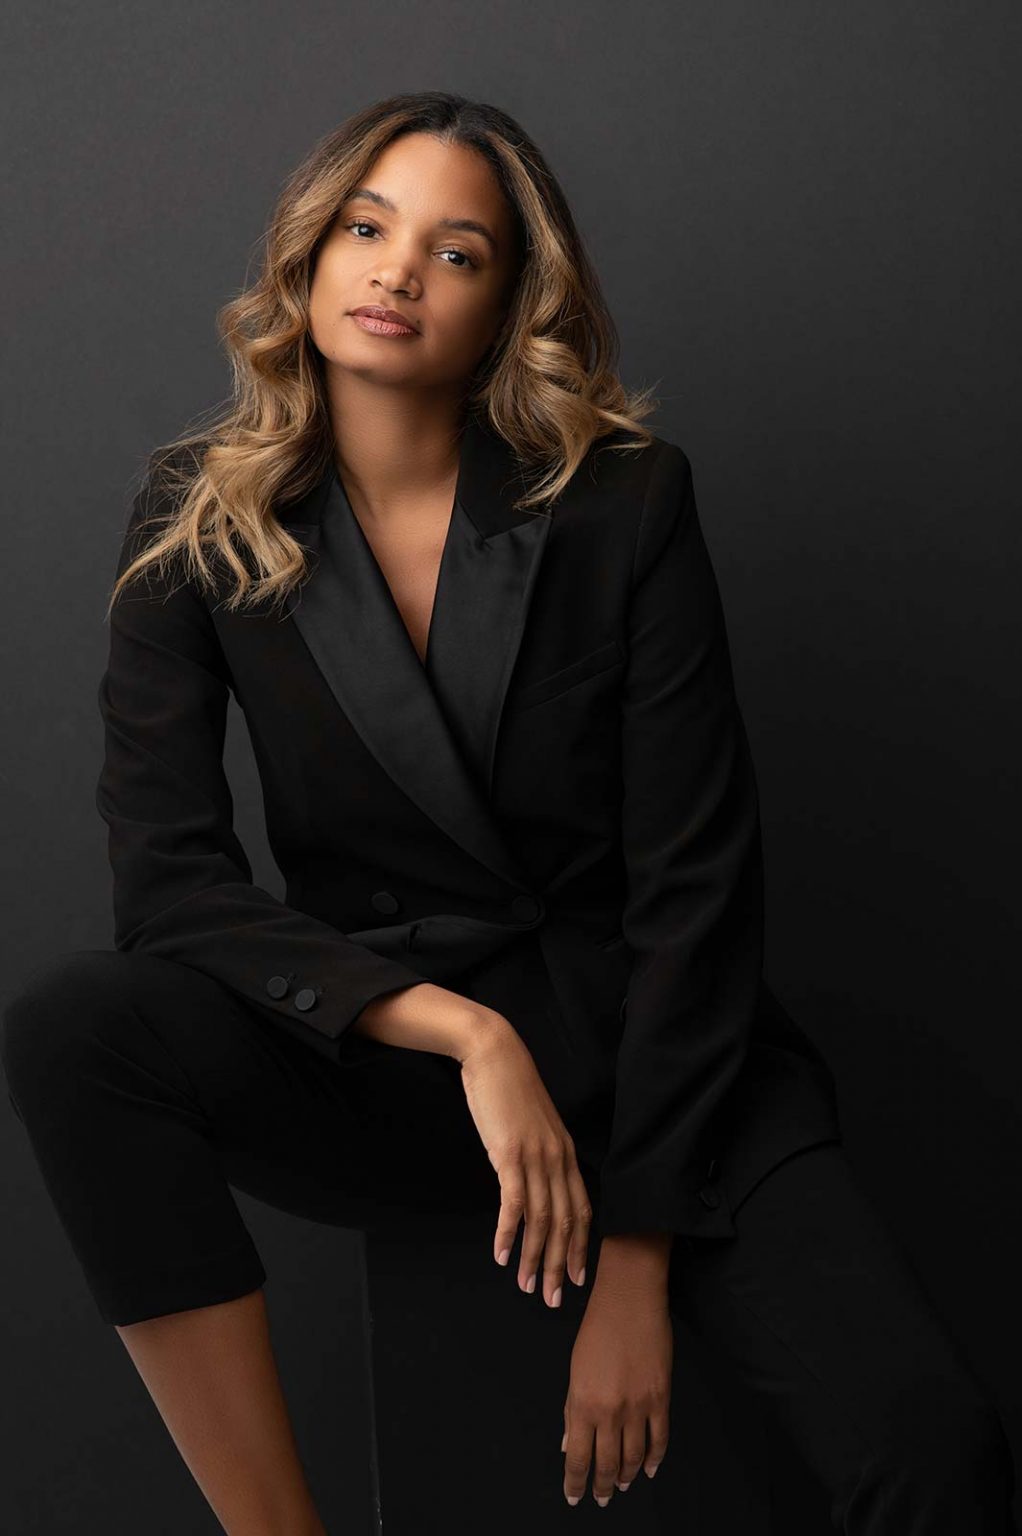 Woman wearing casual business attire in NYC photo studio